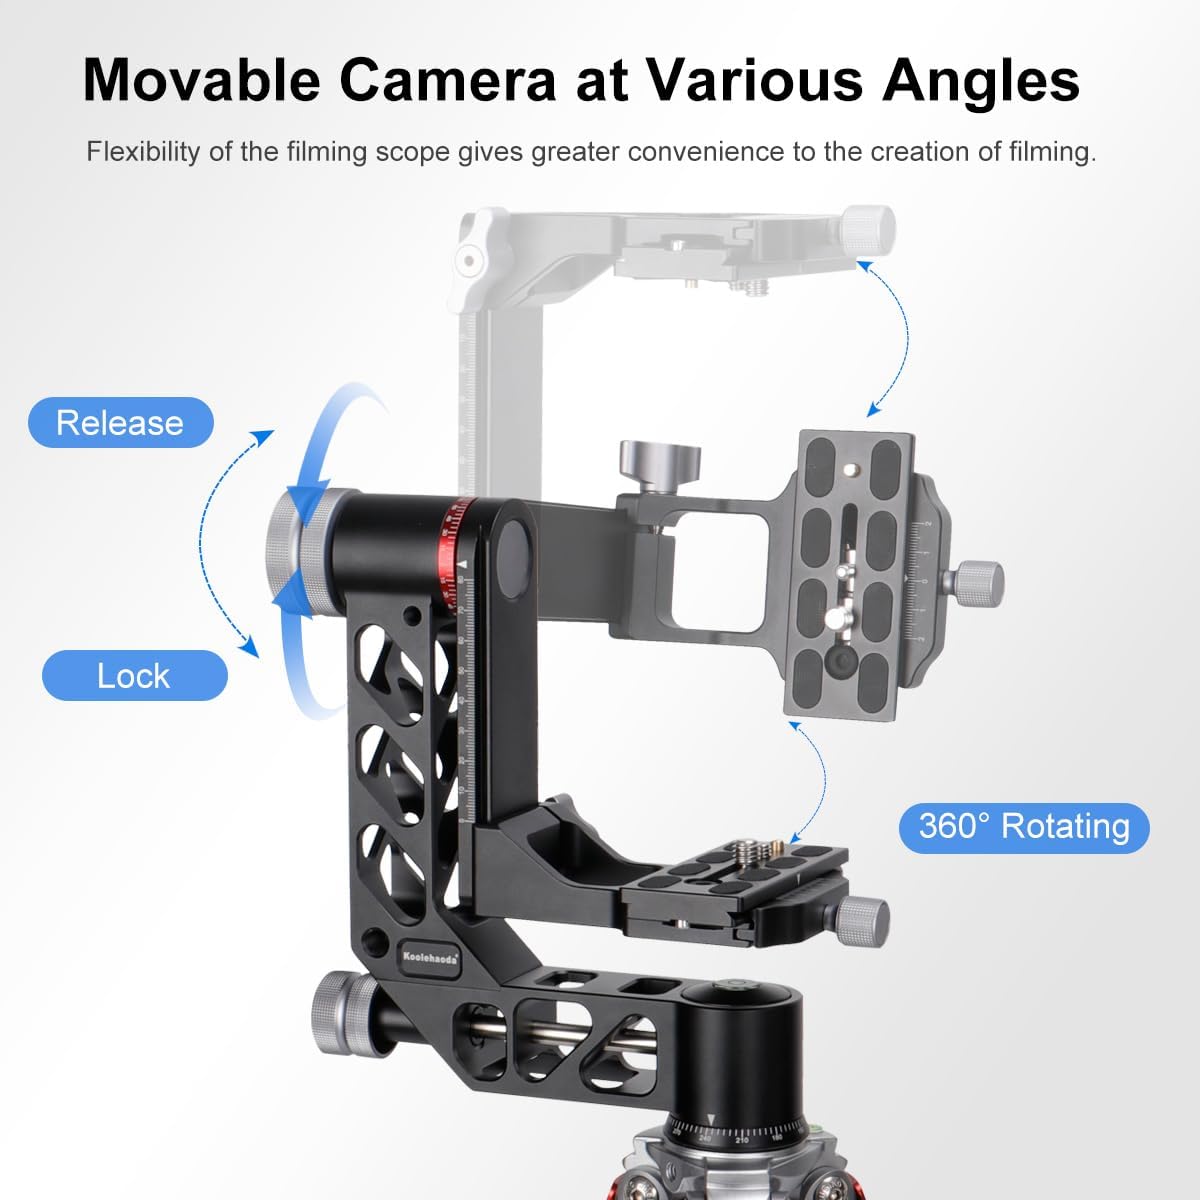 Professional Gimbal Head Tripod Head Aluminum Alloy Heavy Duty 360° Panoramic with Arca-Swiss Standard 1/4 inch QR Plate for DSLR Cameras up to 55.11lbs/25kg. (GH-3)